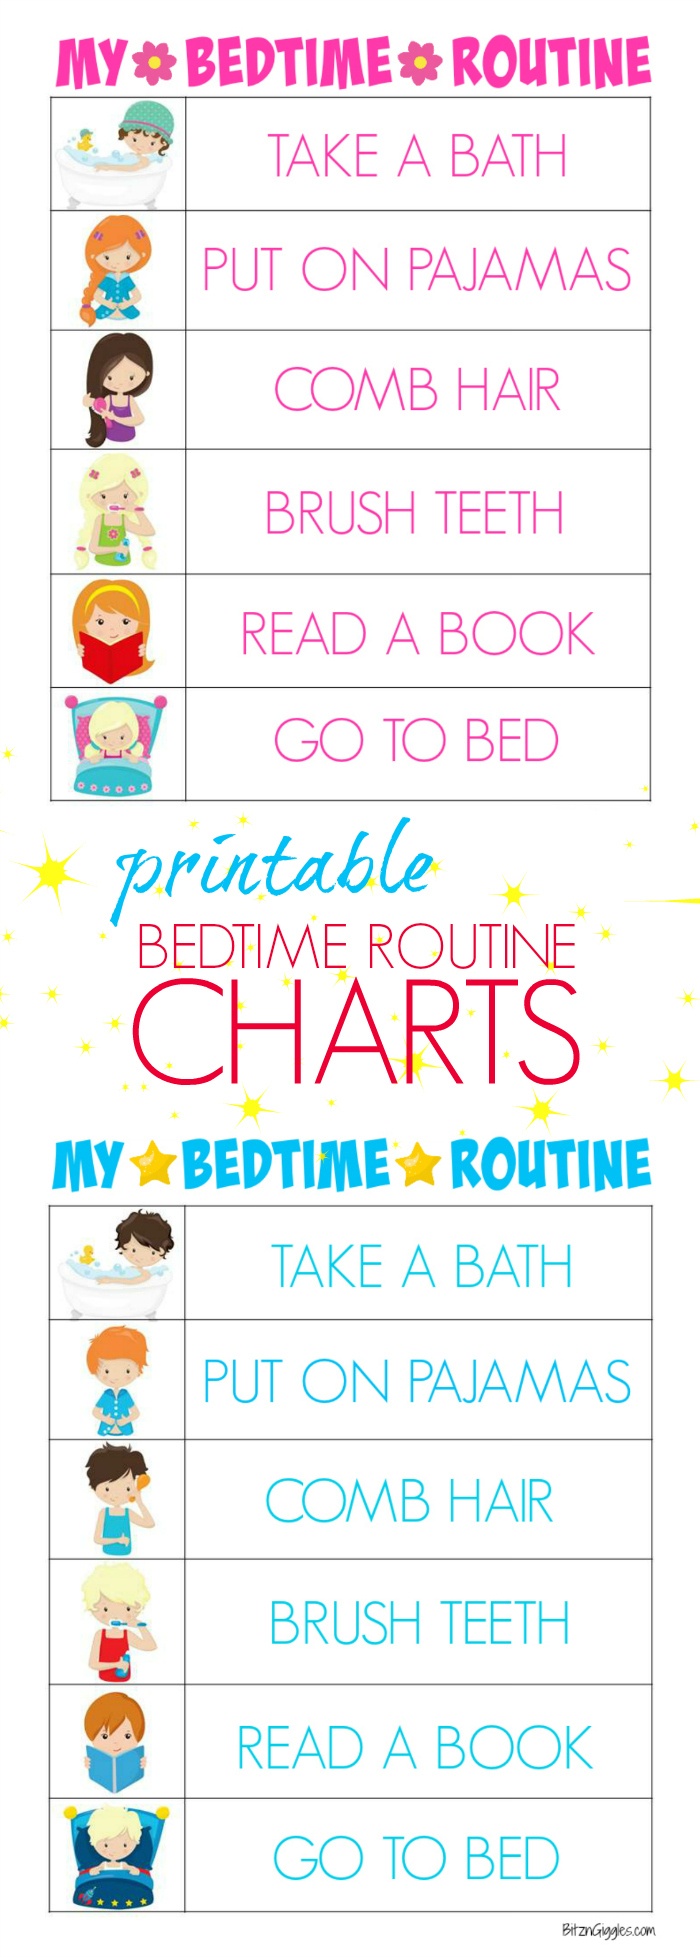 Printable Bedtime Routine Charts - Bitz &amp;amp; Giggles - Children&amp;#039;s Routine Charts Free Printable